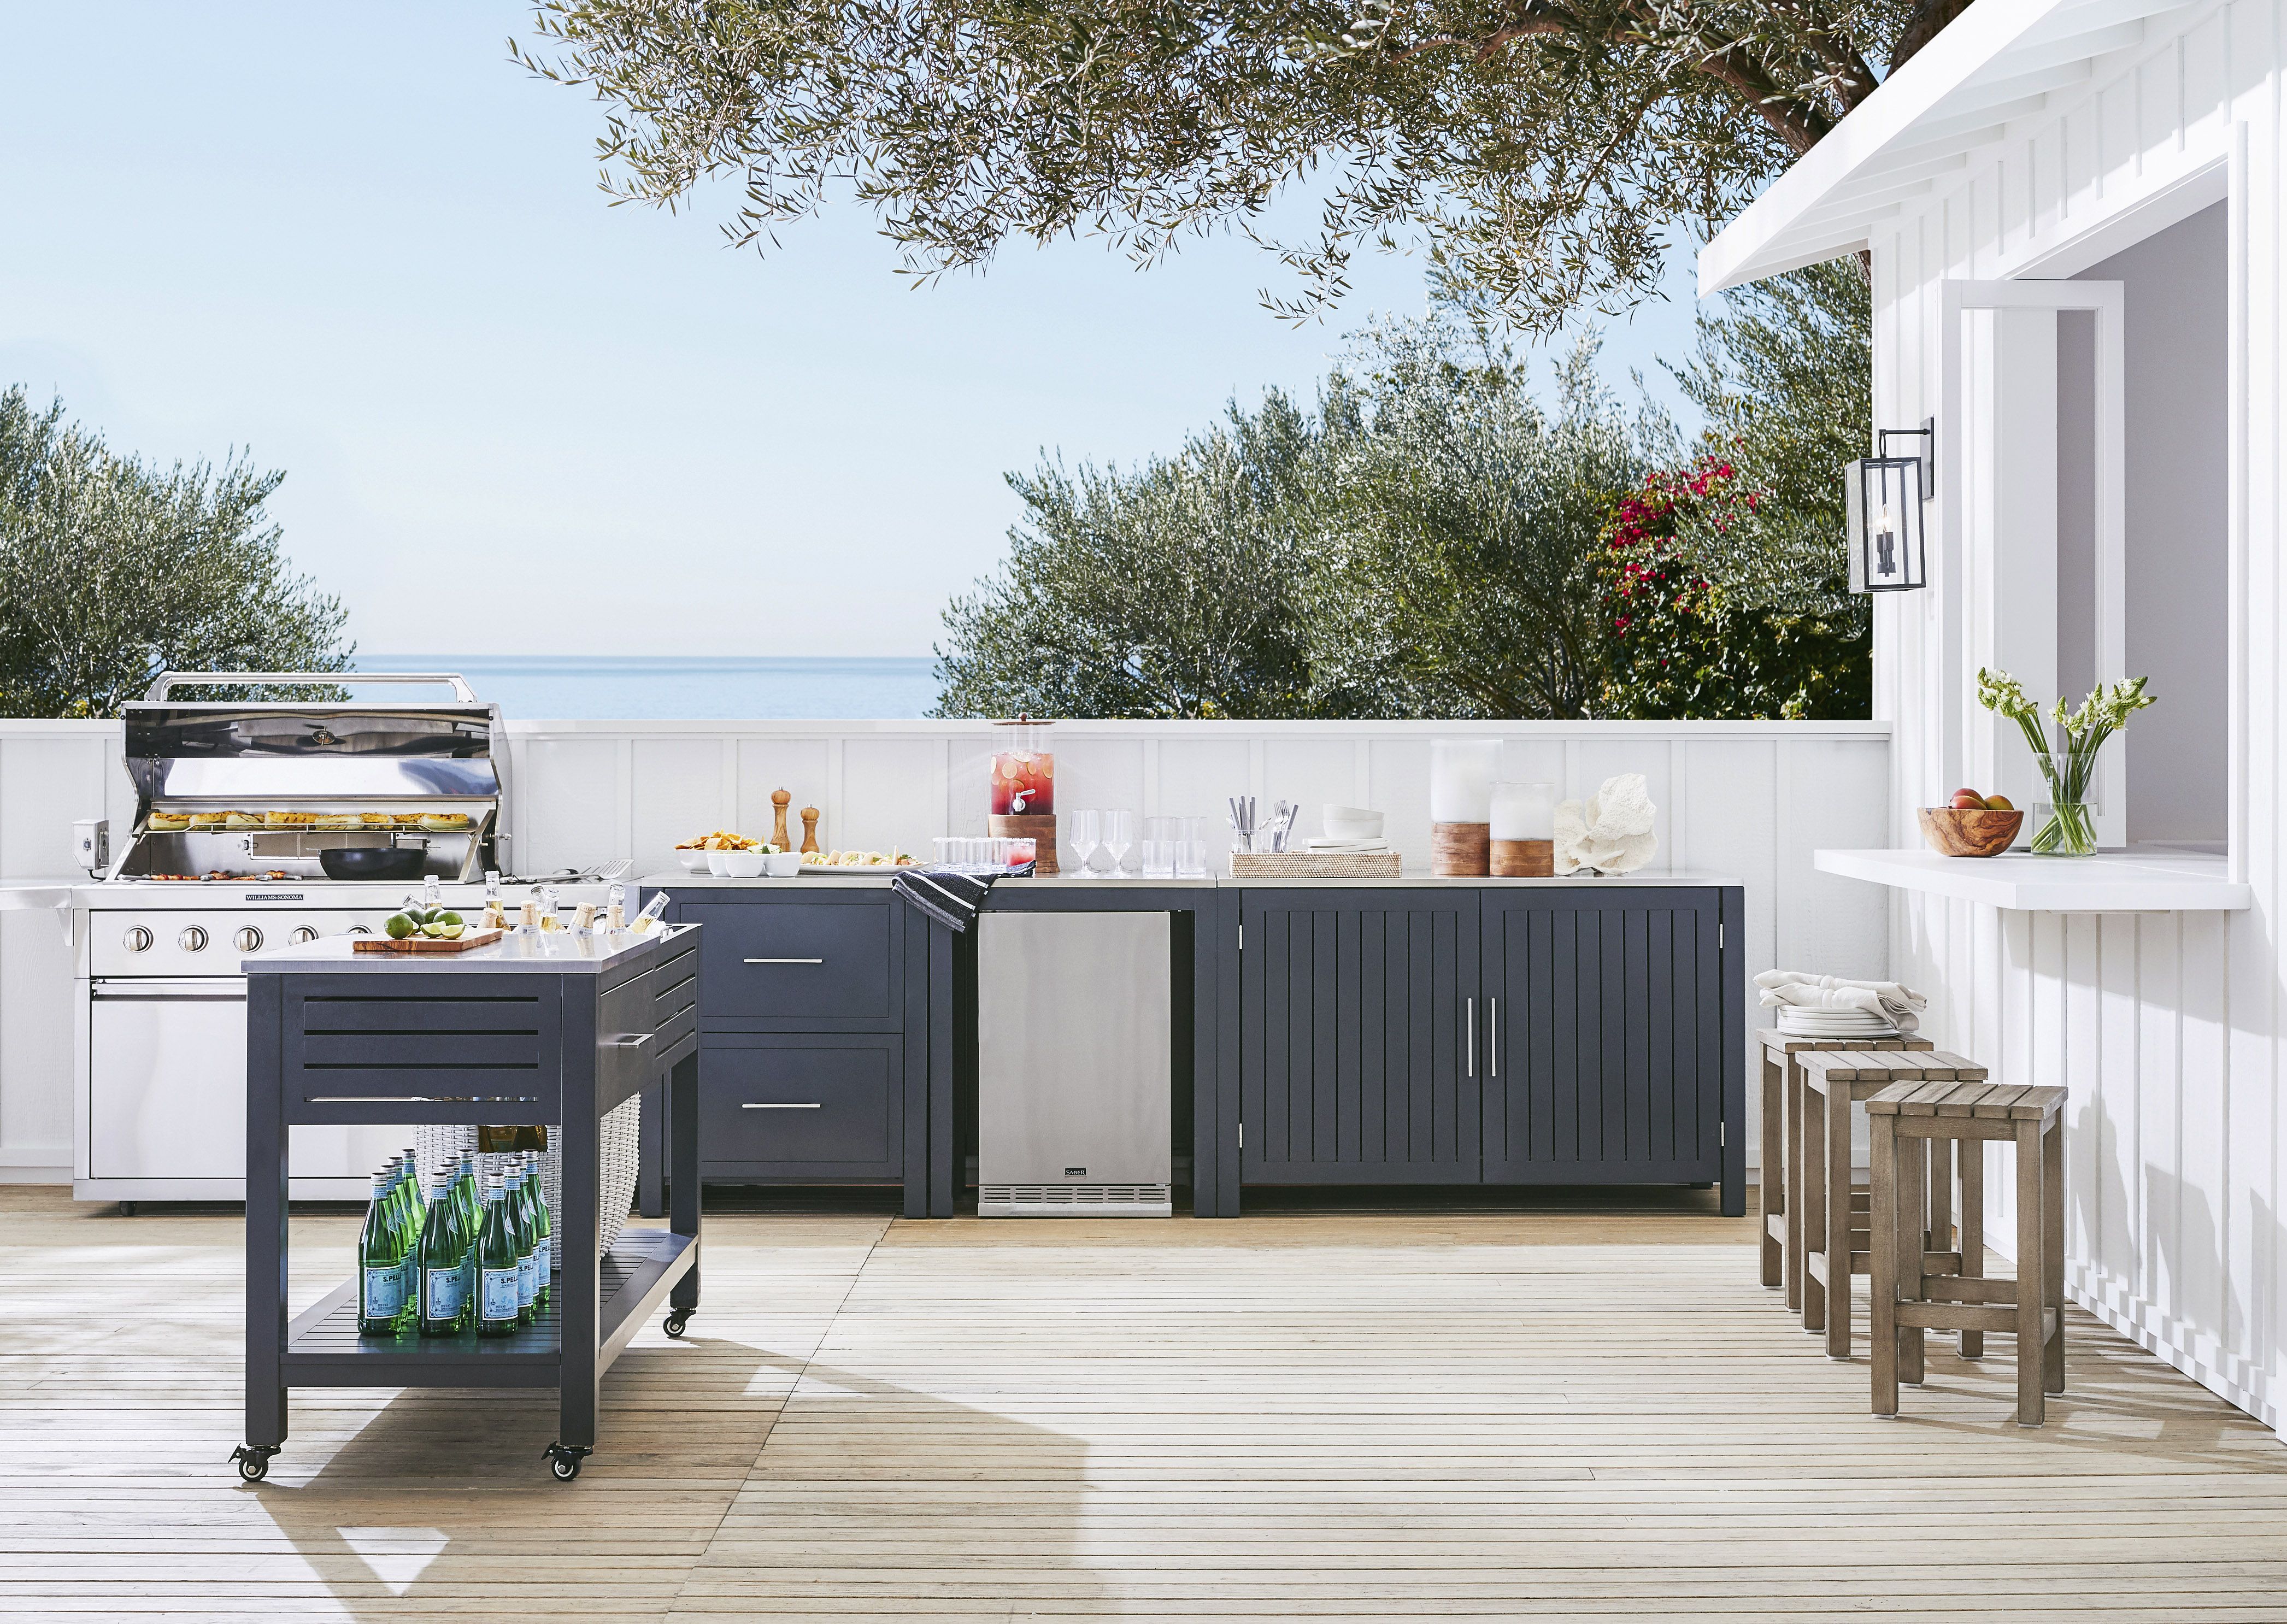 26 products to create the perfect outdoor kitchen